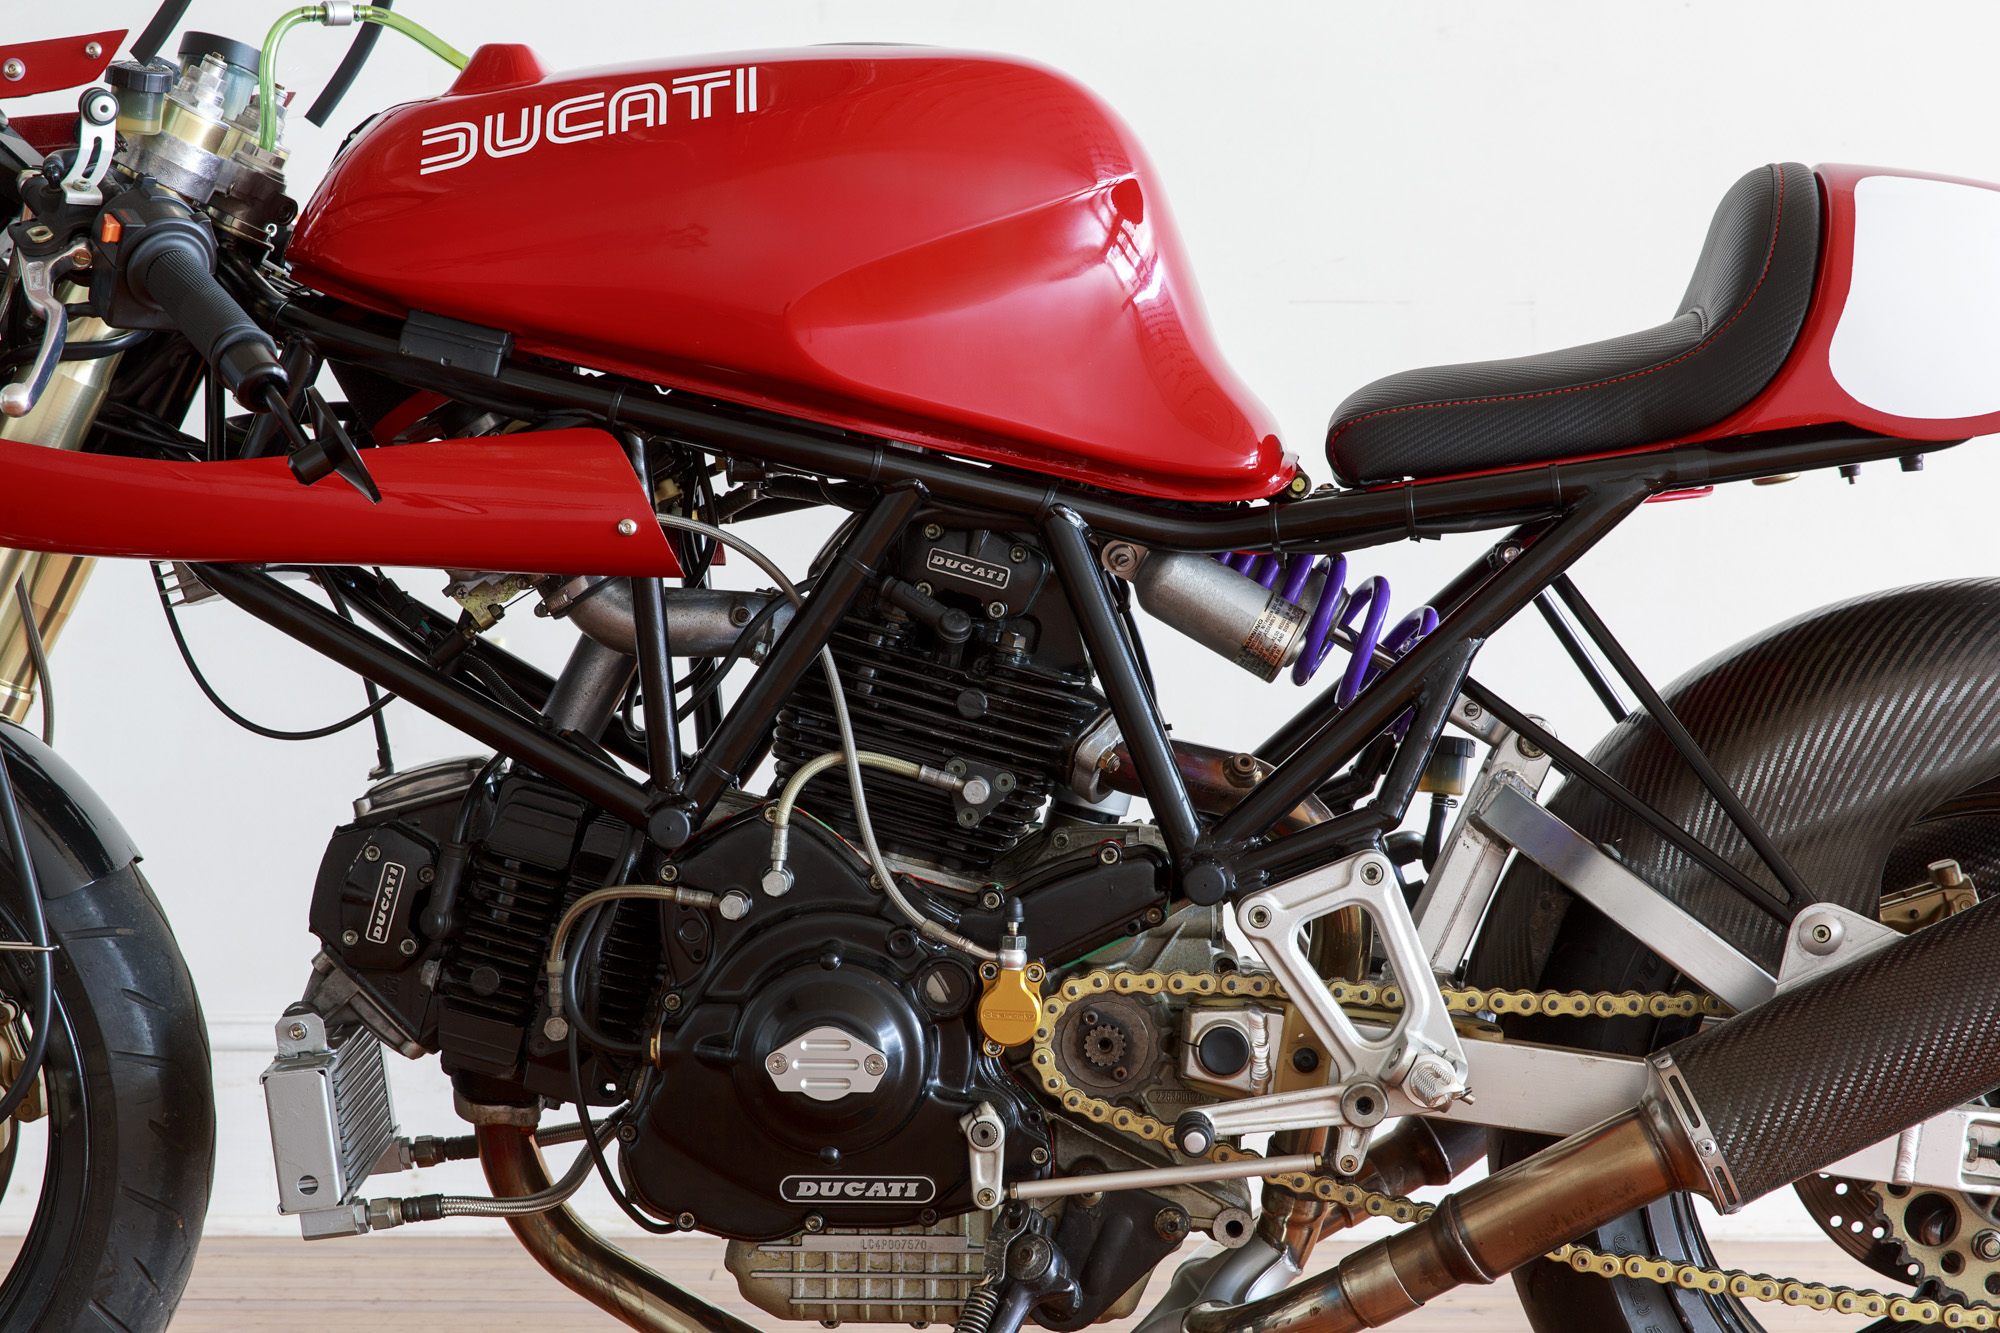 Ducati 900ss cafe racer engine